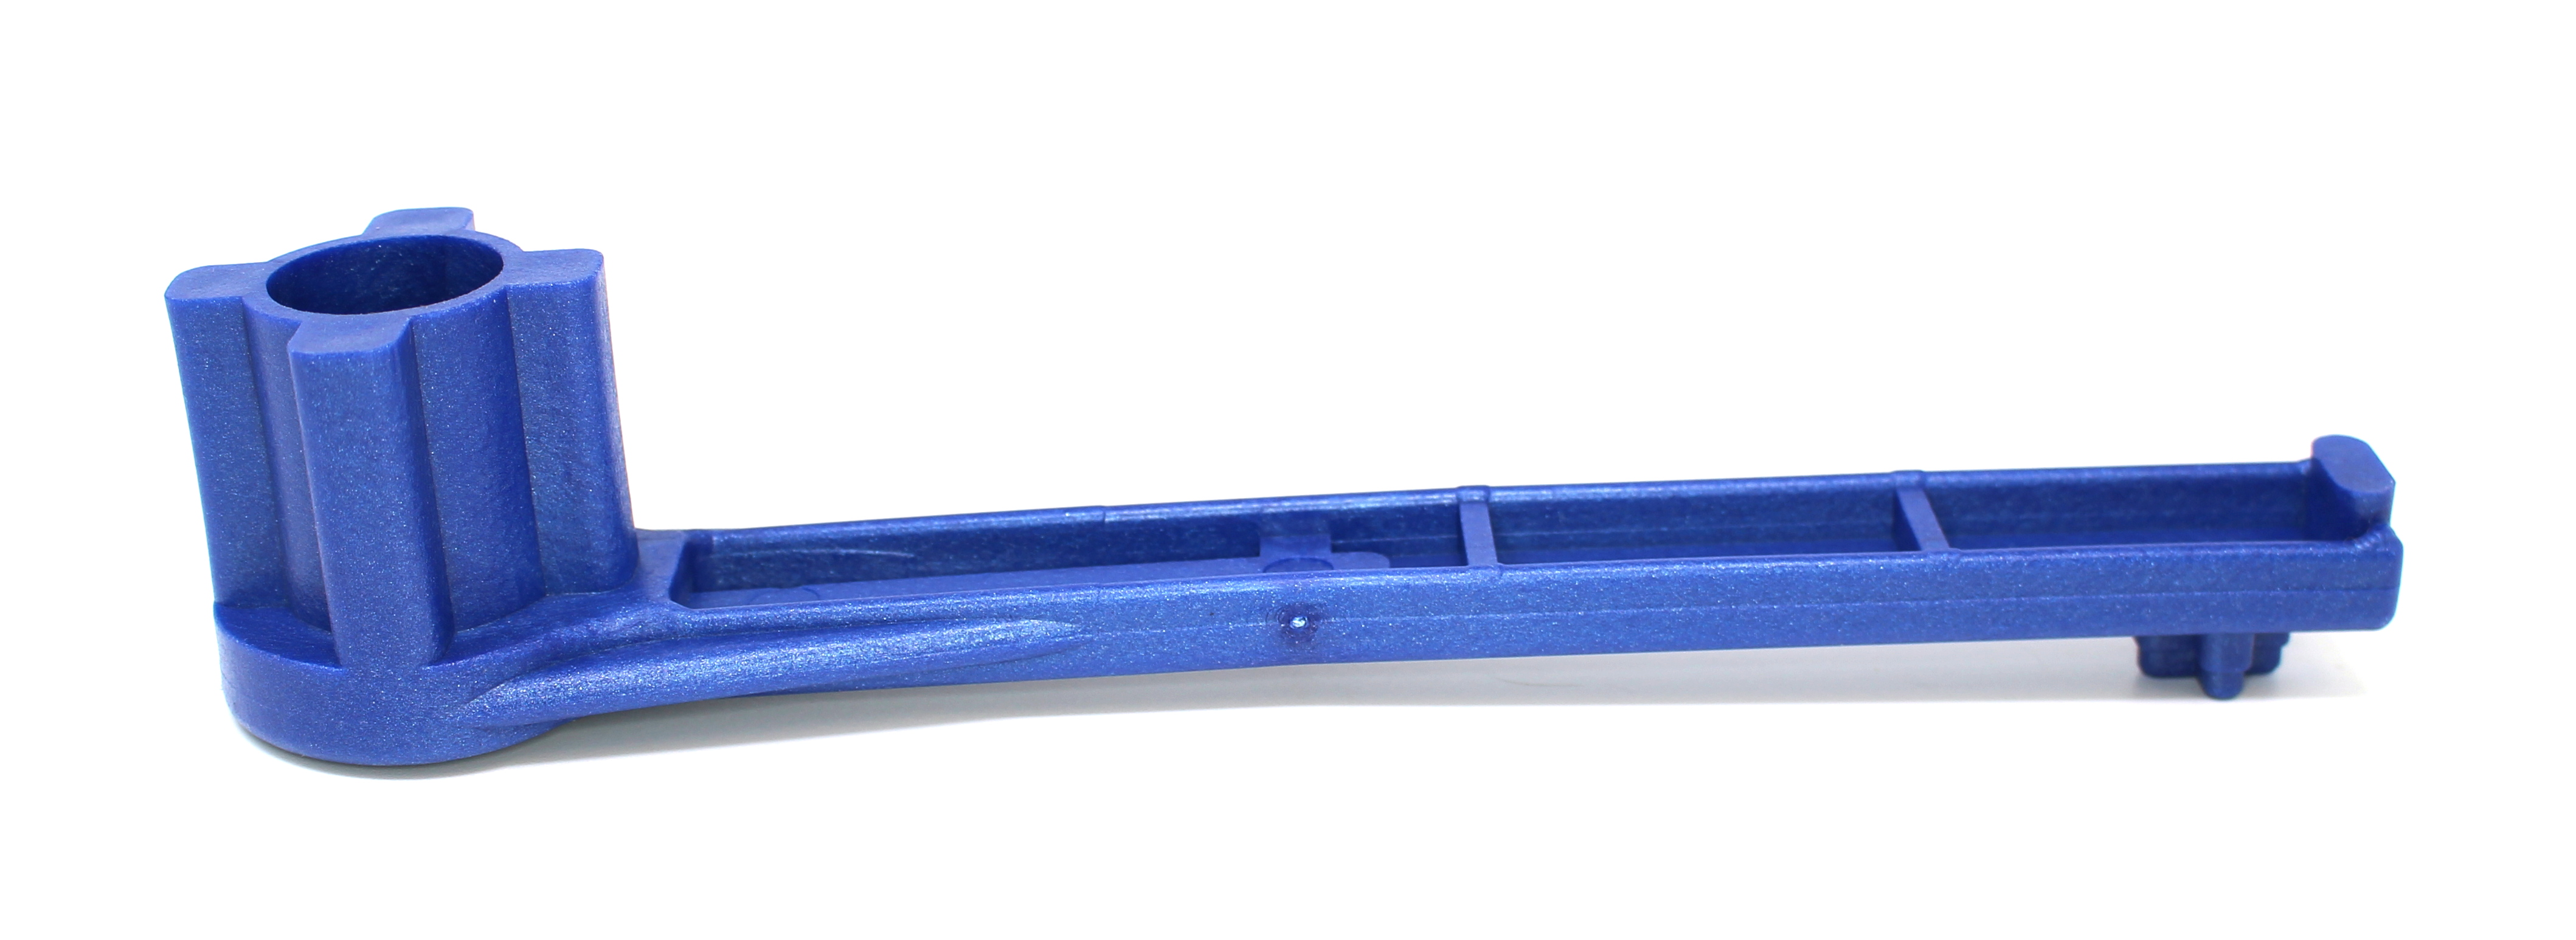 Gas and Bung Wrench Non Sparking Solid Drum Bung Nut Wrench (BLUE) 2 Pack - image 3 of 9